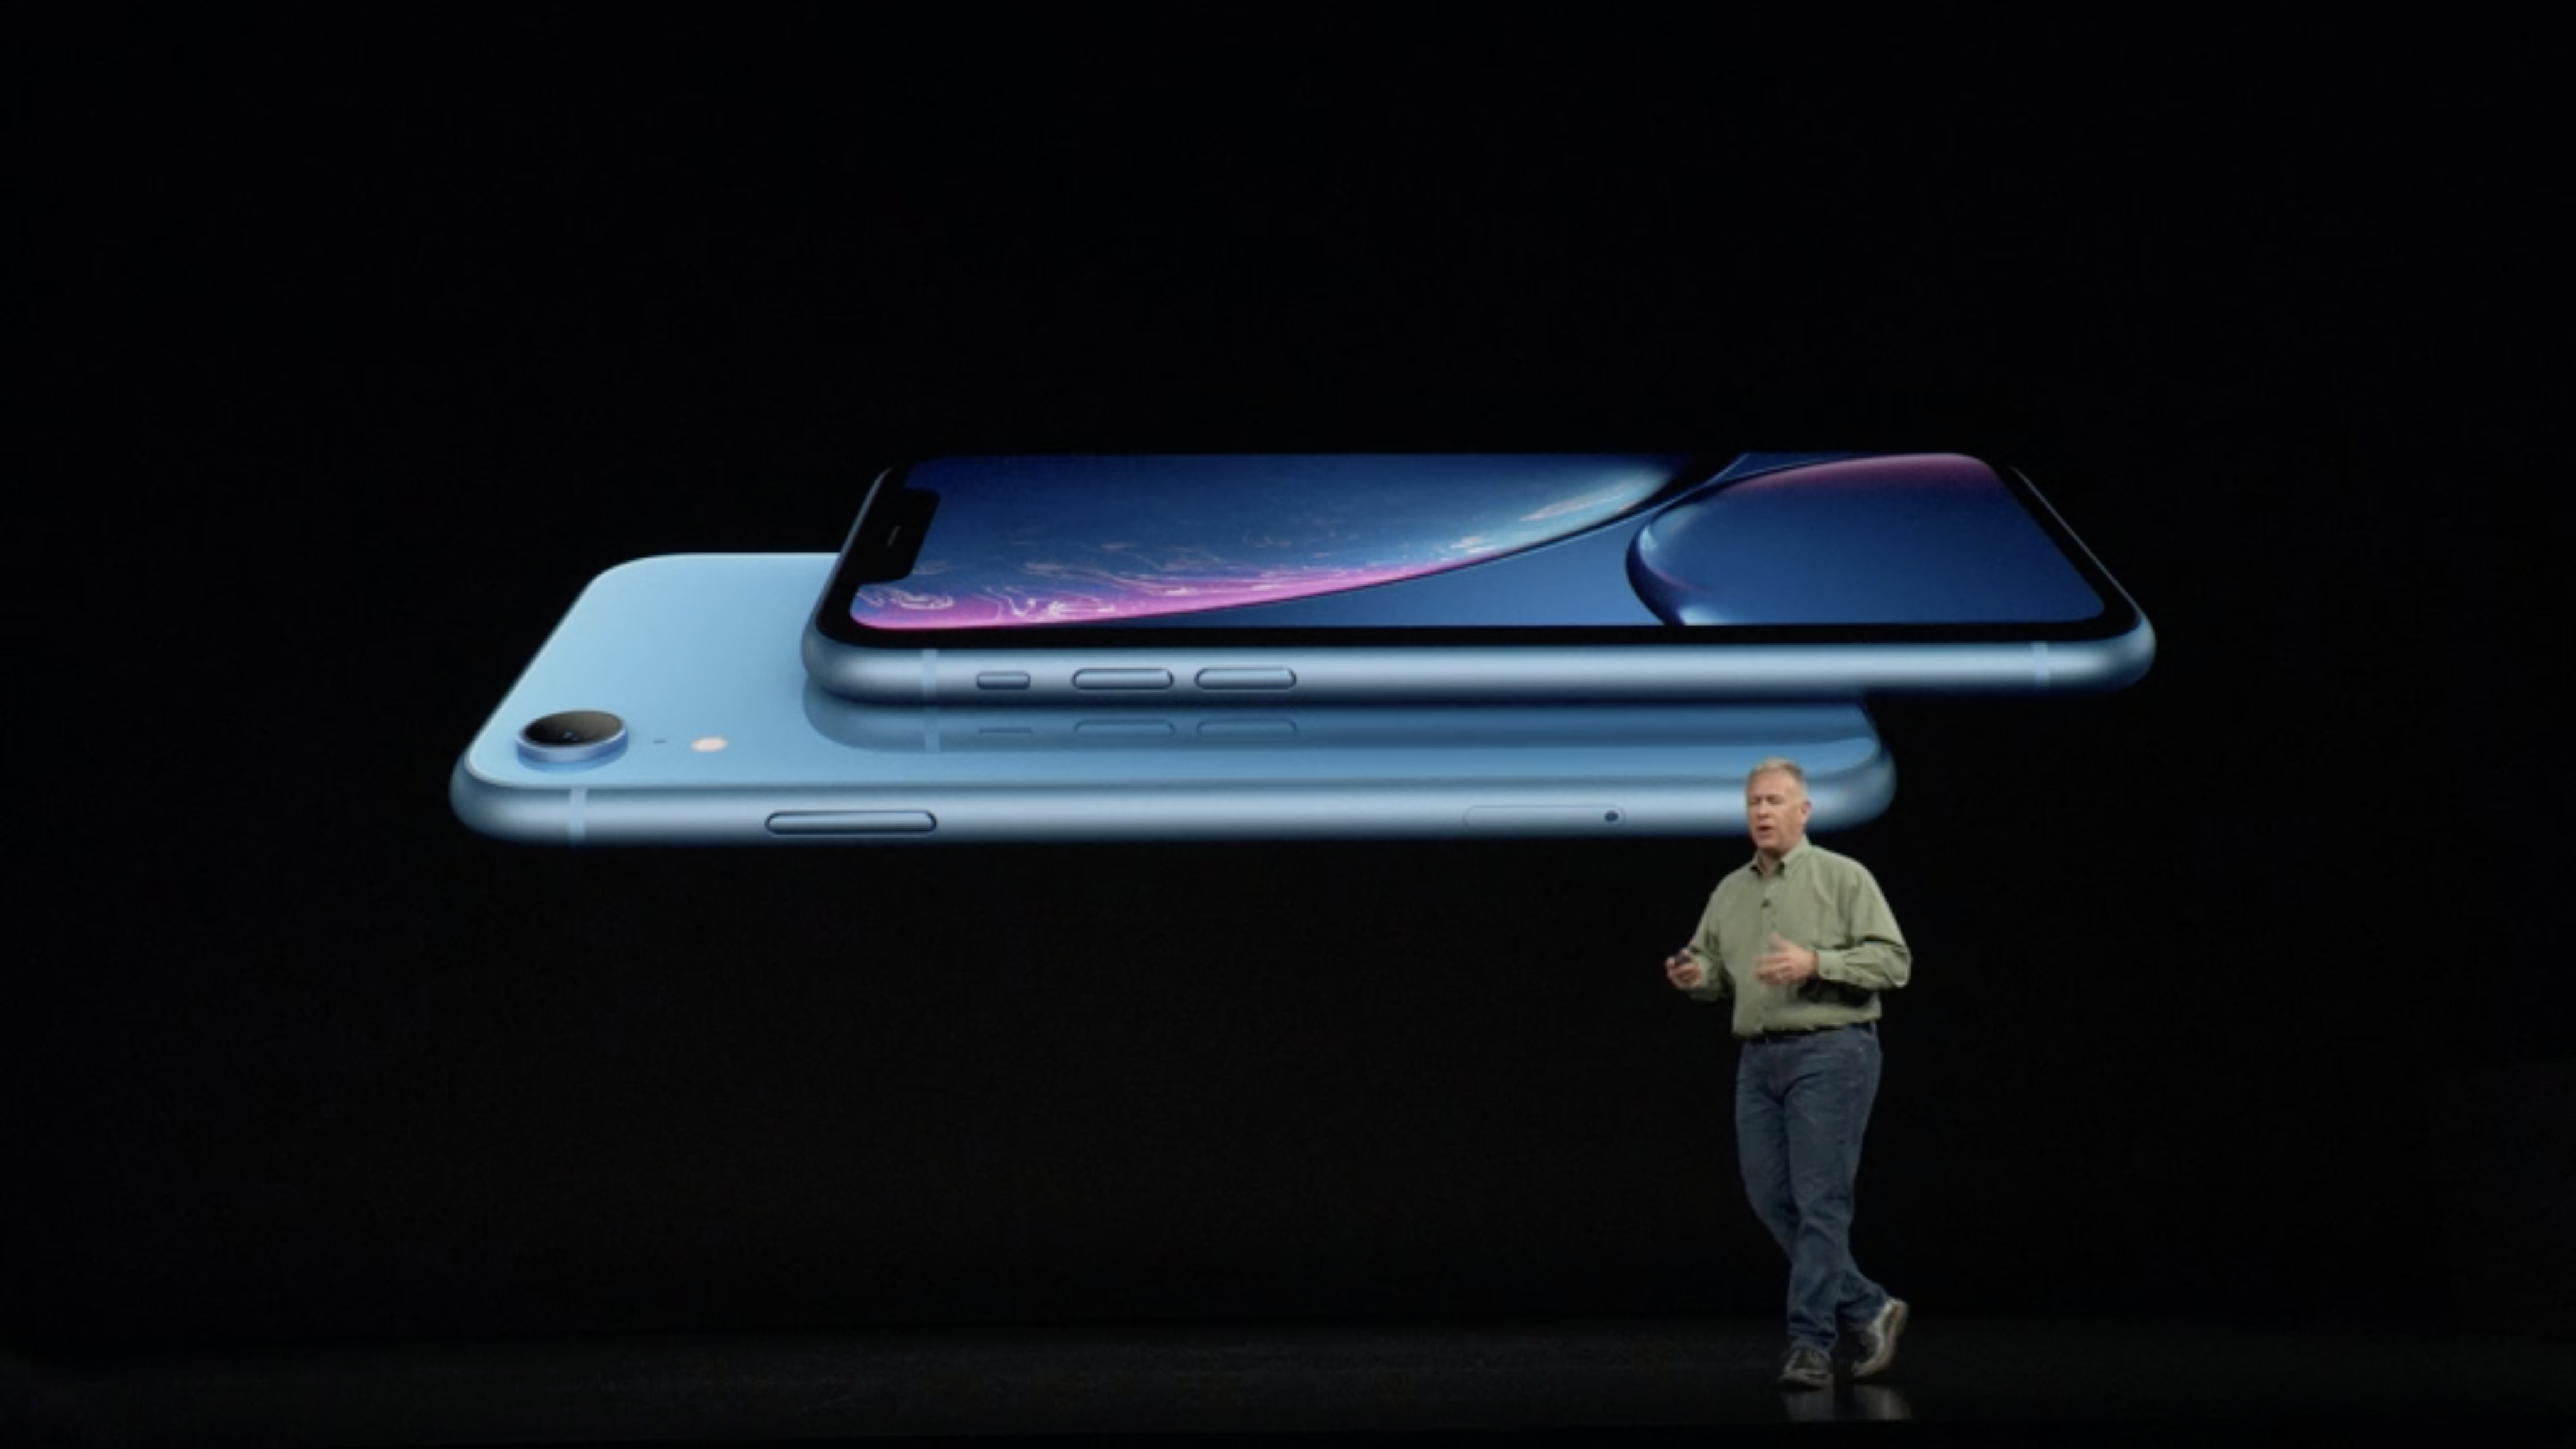 kleermaker Brutaal Evaluatie Phil Schiller gives his take on iPhone XR naming and '720p' screen  resolution controversy in new interview - 9to5Mac